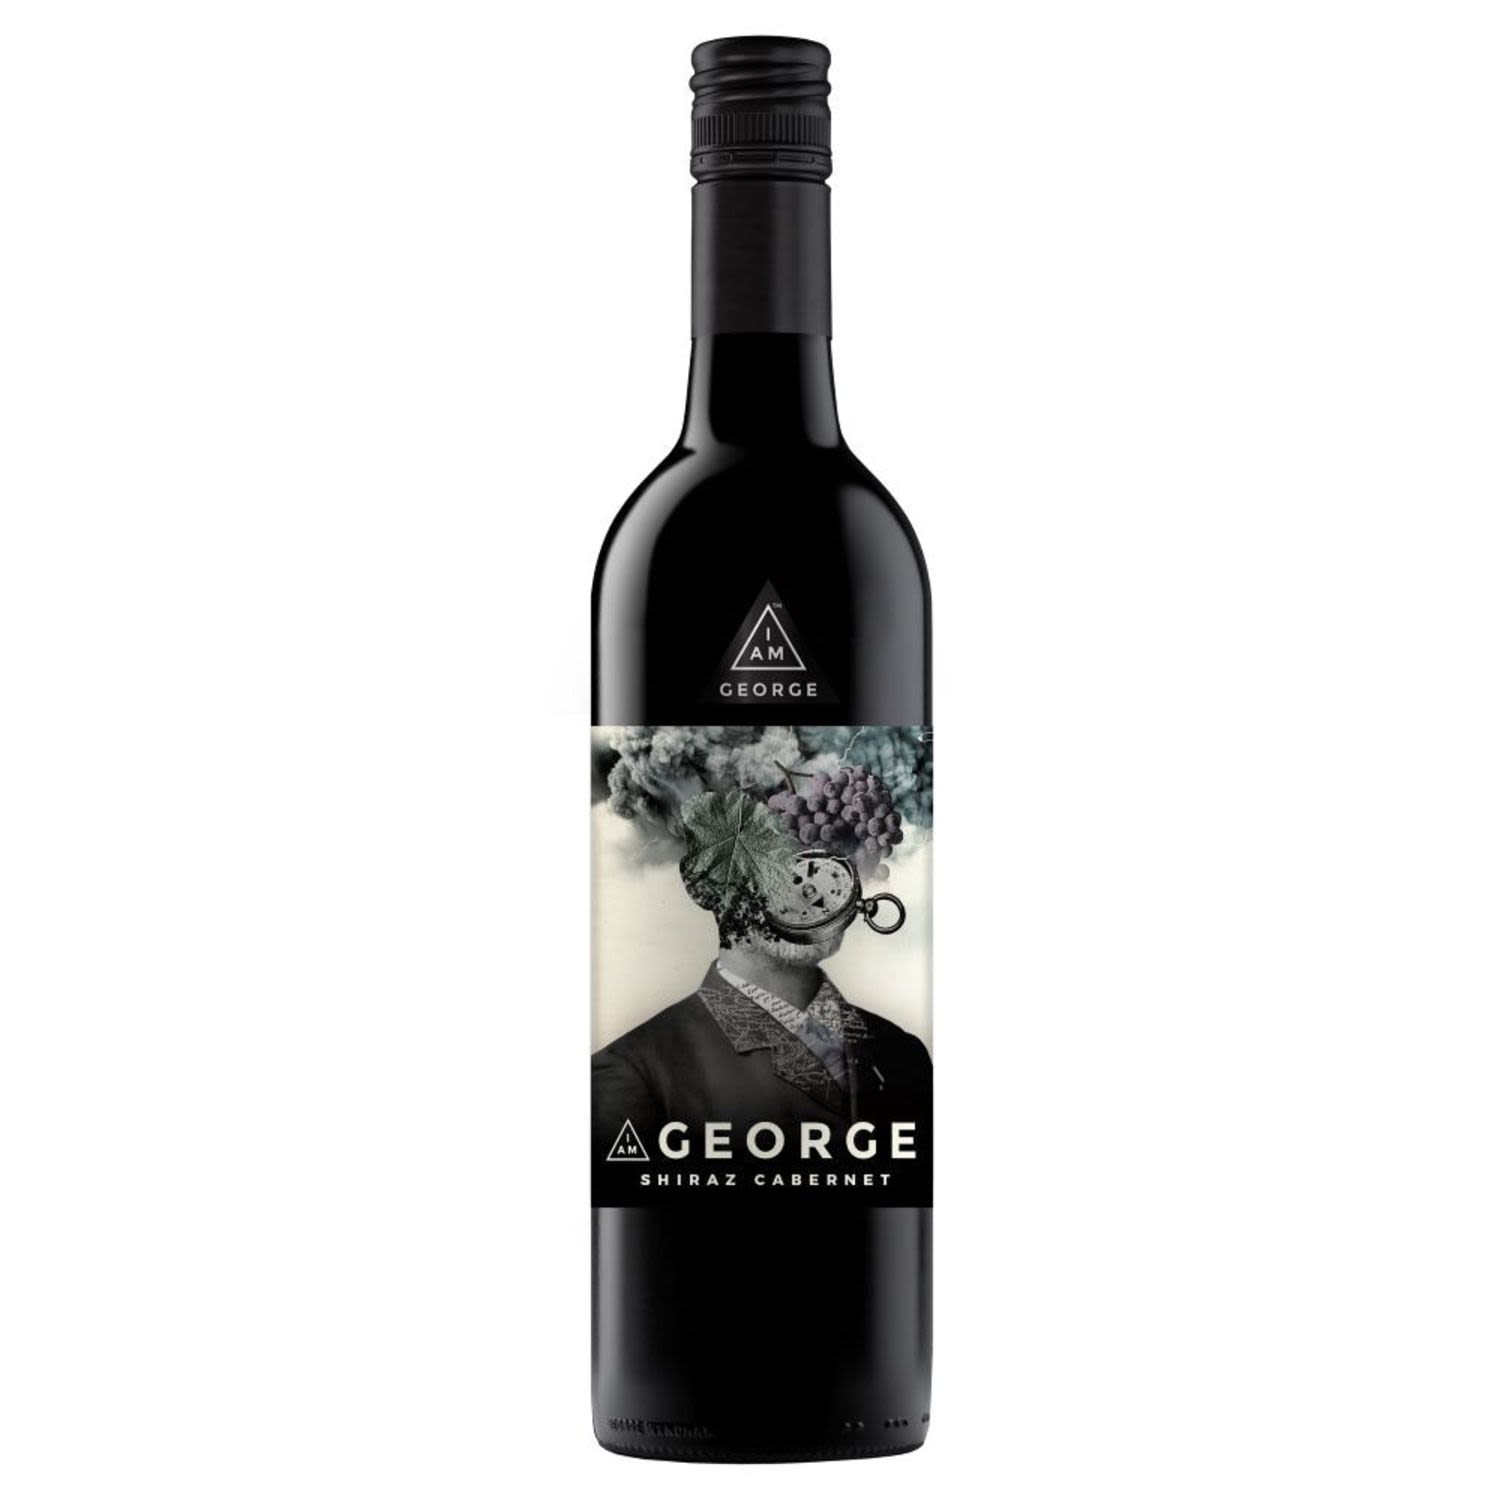 A beautifully smooth blend of Shiraz and Cabernet Sauvignon that is robust yet stylish, with a softly rounded mid palate and structural tannins.<br /> <br />Alcohol Volume: 13.50%<br /><br />Pack Format: Bottle<br /><br />Standard Drinks: 8.3</br /><br />Pack Type: Bottle<br /><br />Country of Origin: Australia<br /><br />Region: South Australia<br /><br />Vintage: Vintages Vary<br />